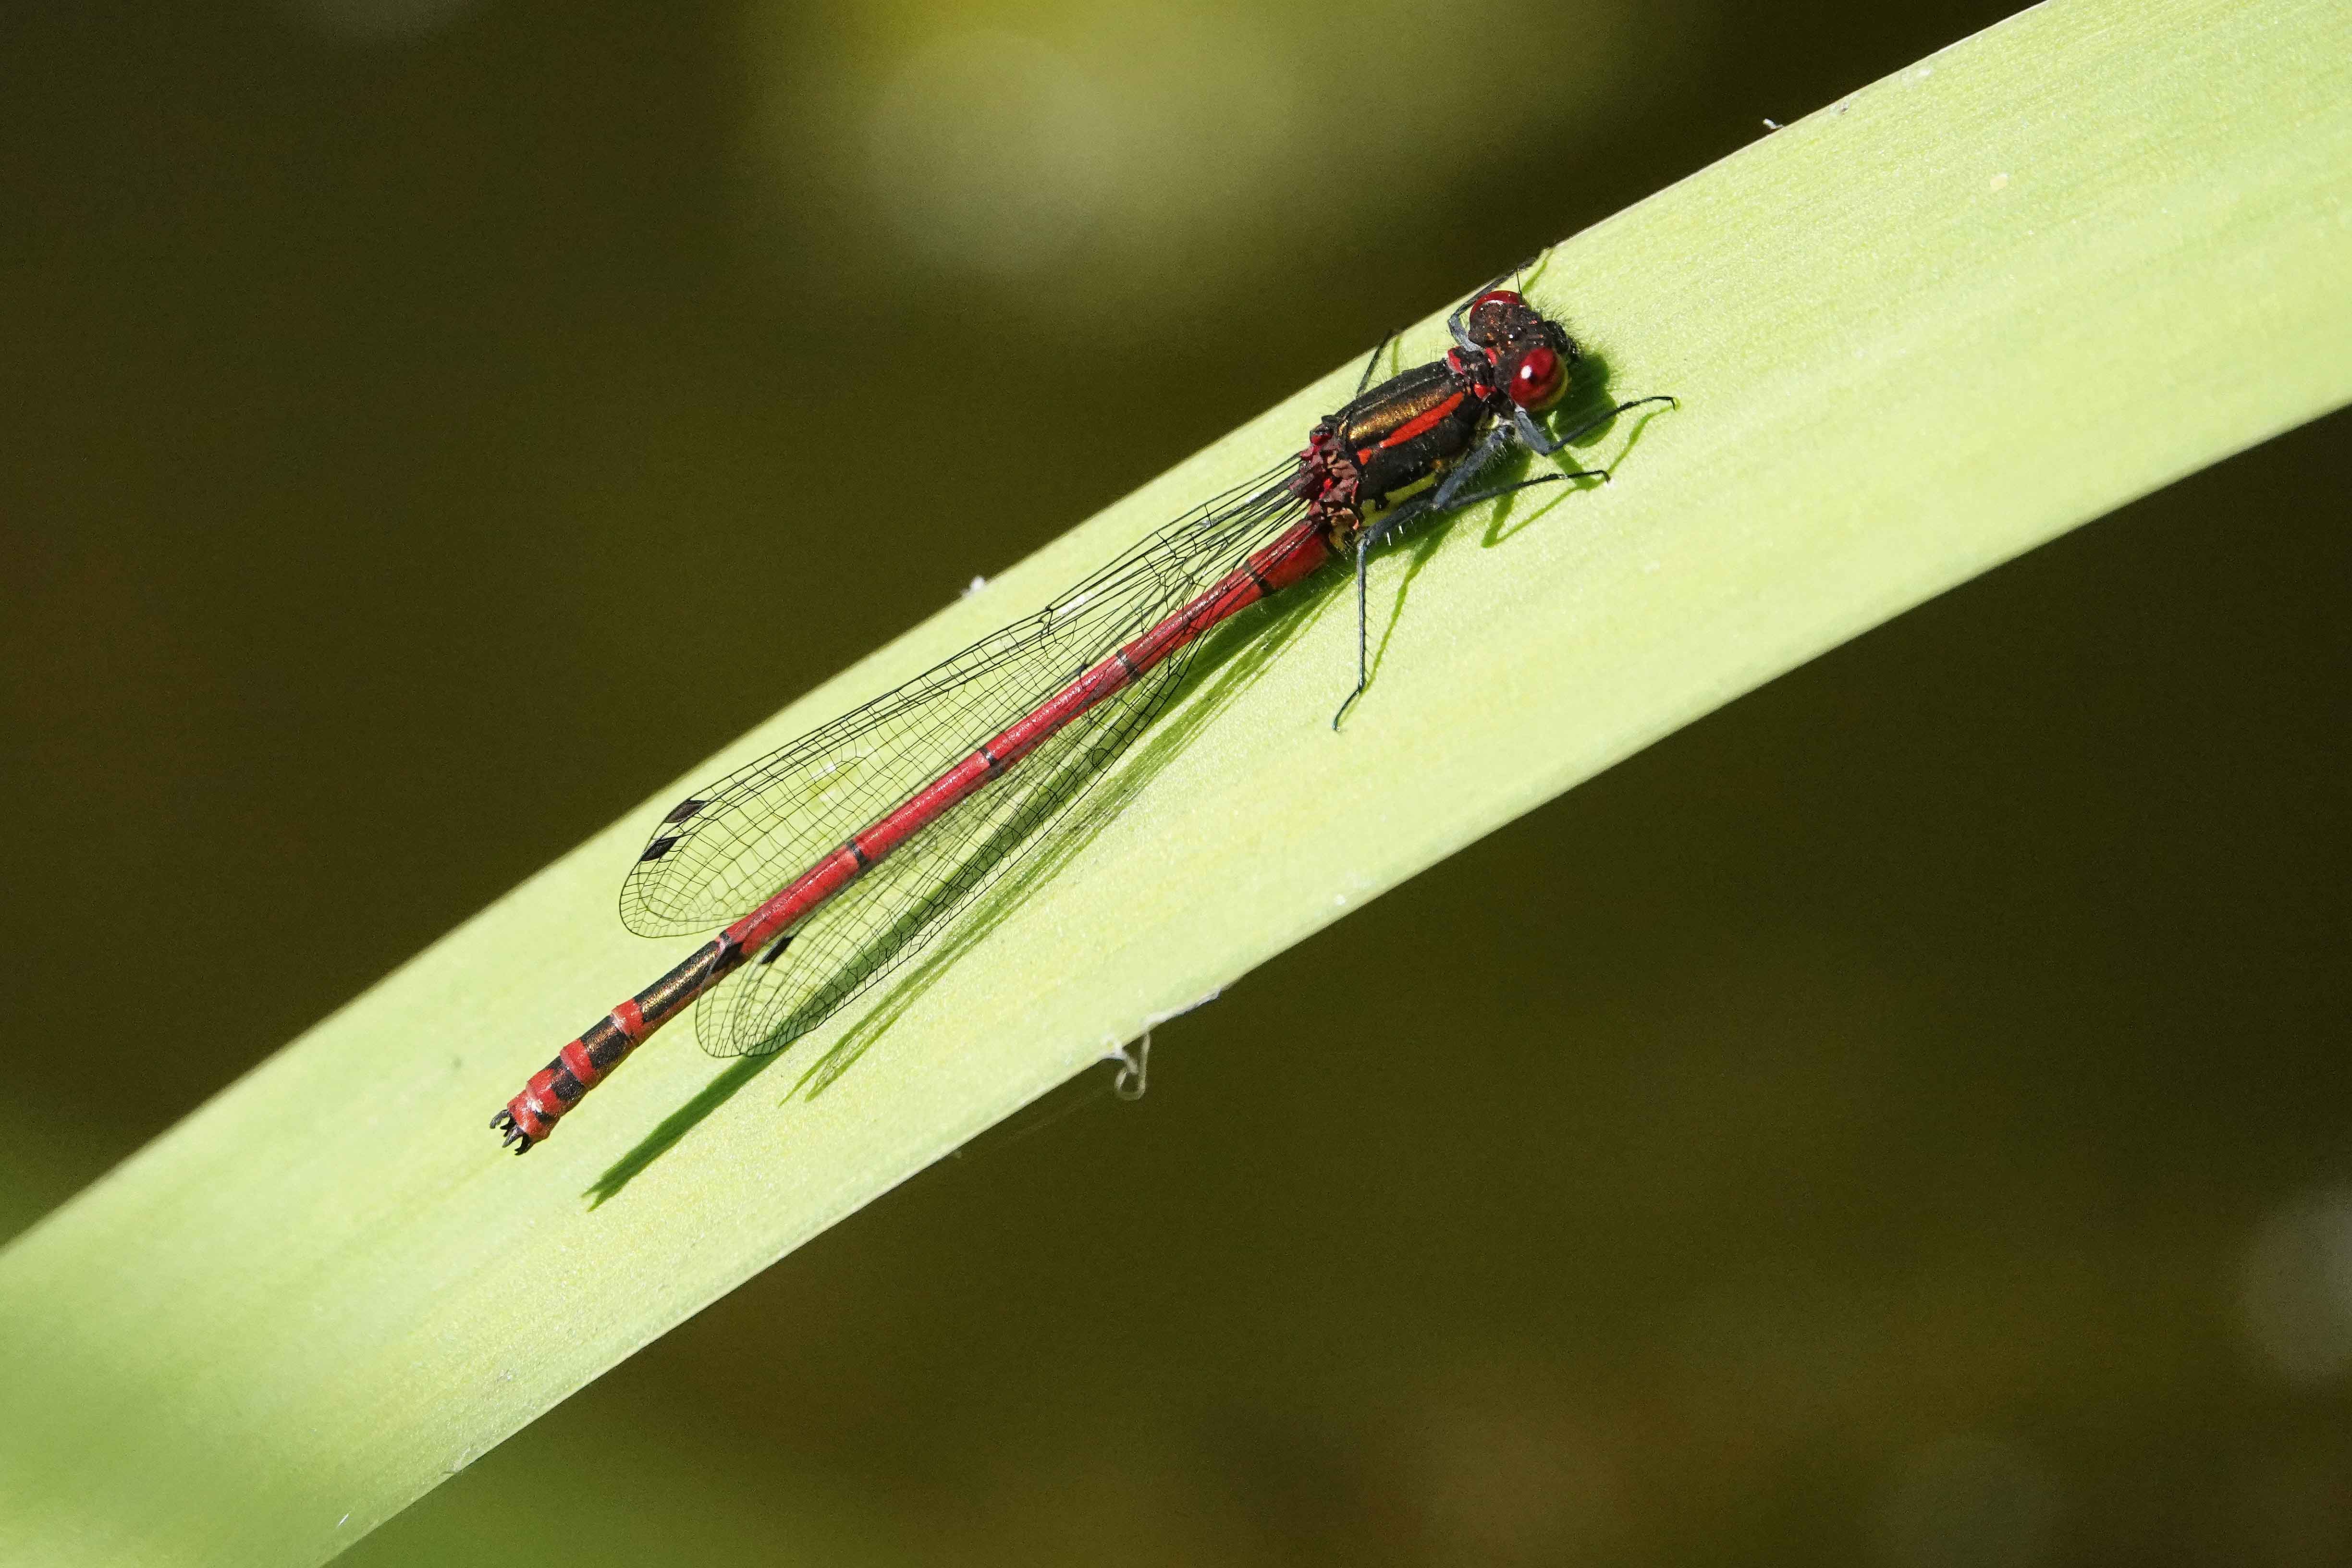 Large-Red-Damselfly-Shropshire-2020-Keith-Offord-lo-res.jpg